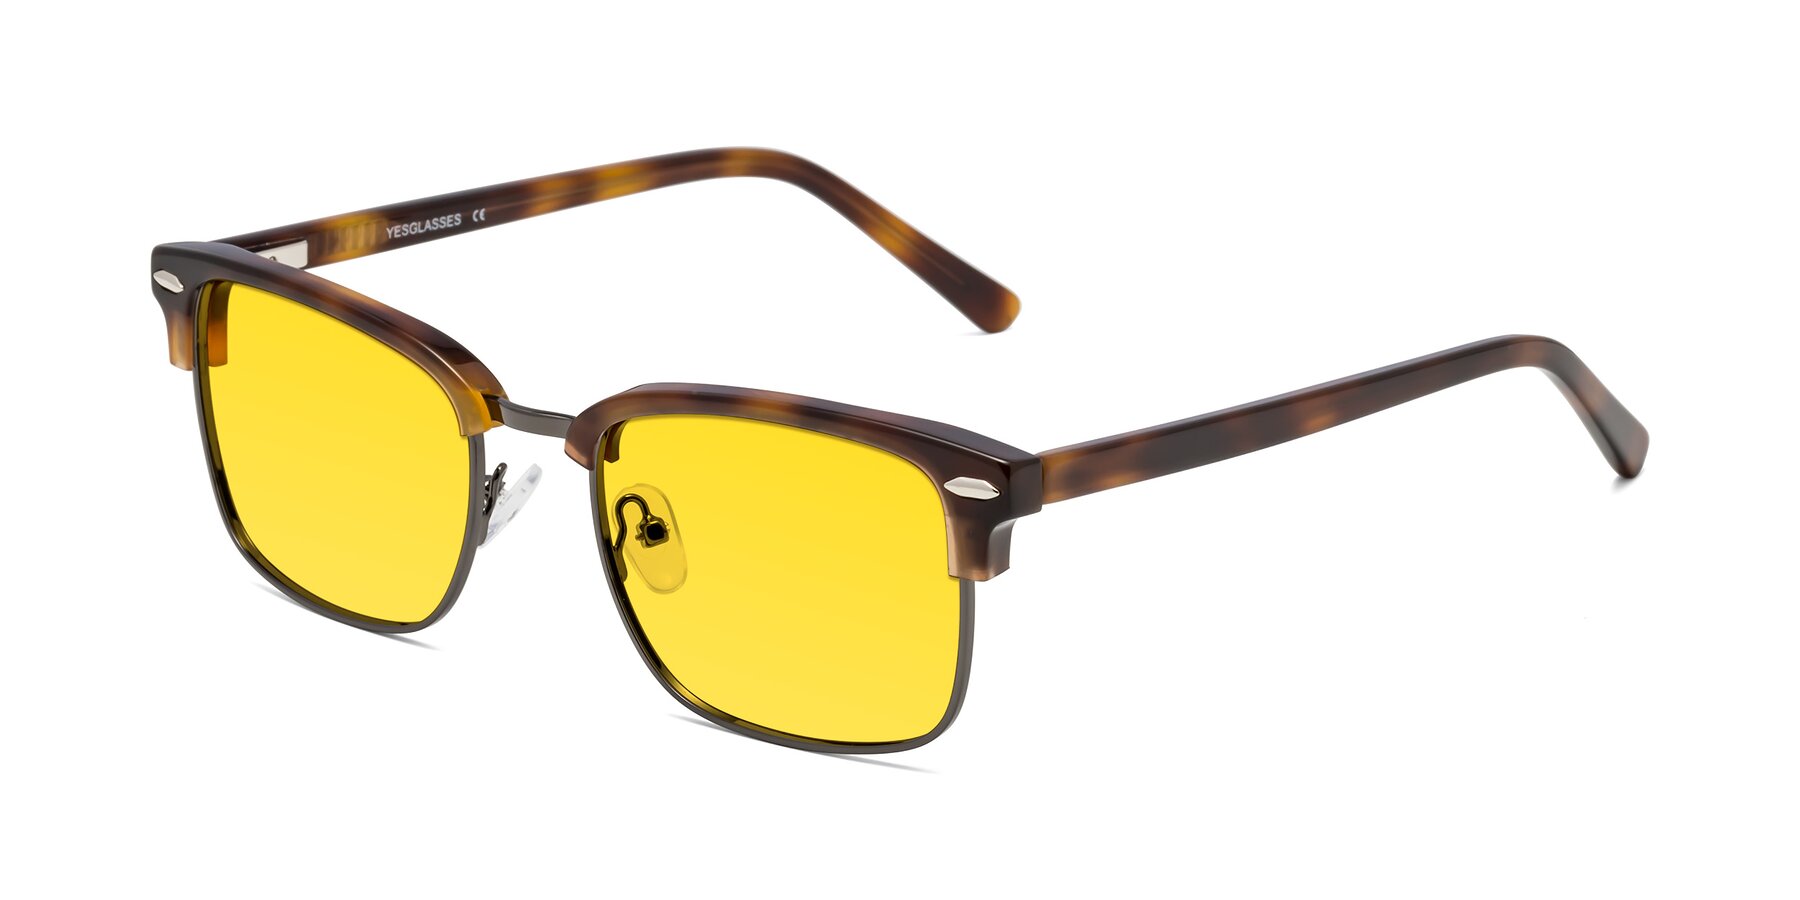 Angle of 17464 in Tortoise/ Gunmetal with Yellow Tinted Lenses